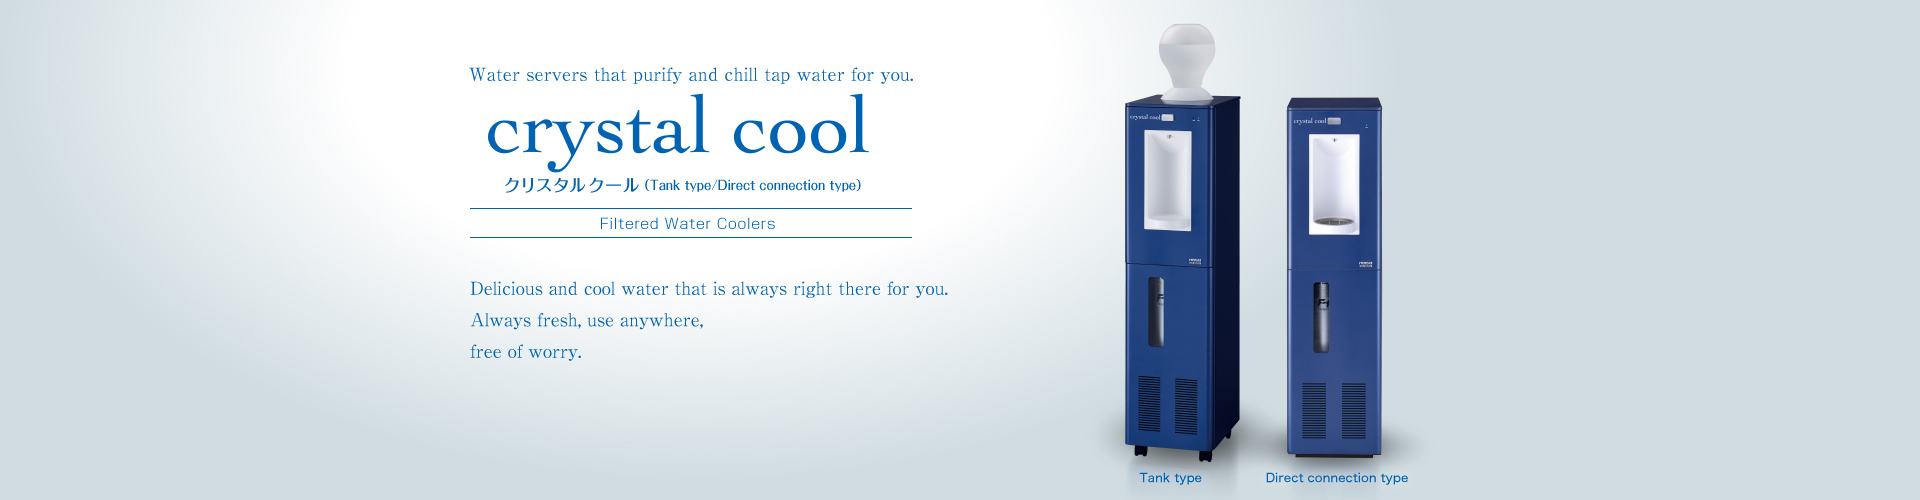 Crystal Cool Filtered Water Coolers